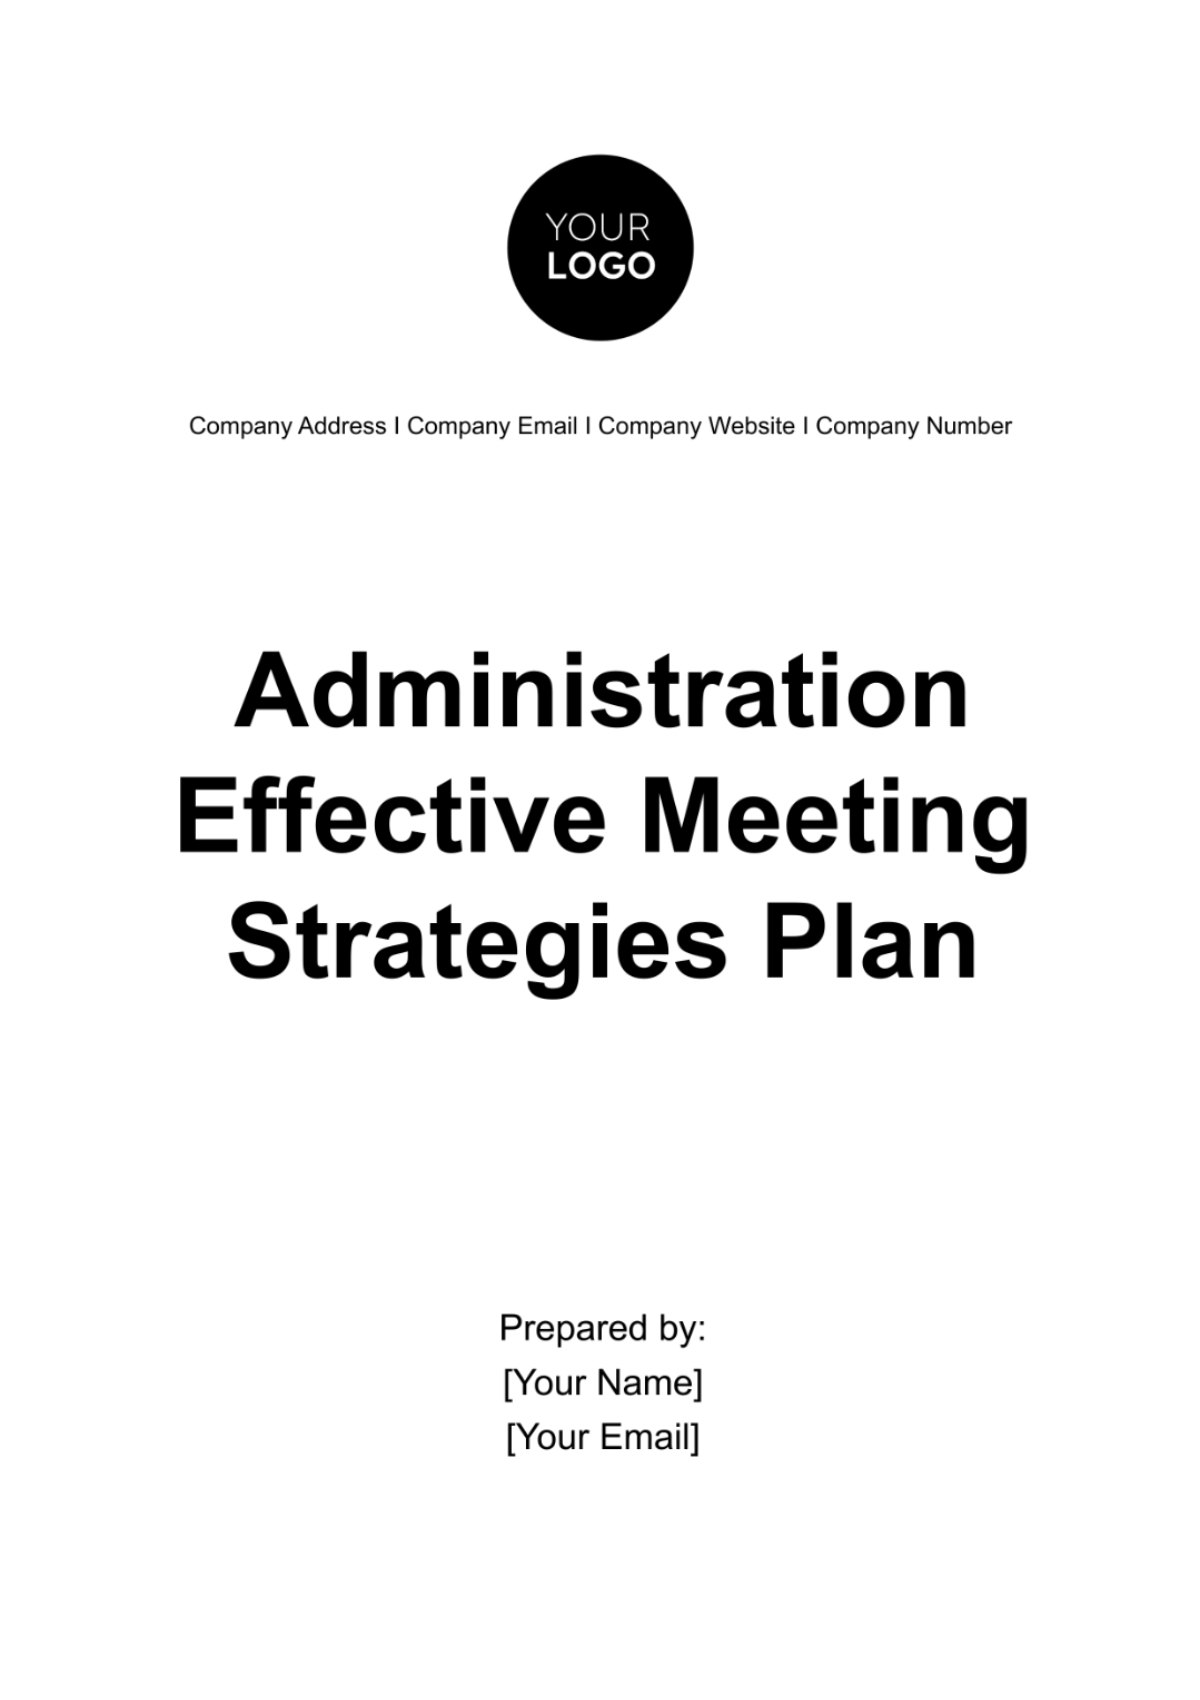 Administration Effective Meeting Strategies Plan Template